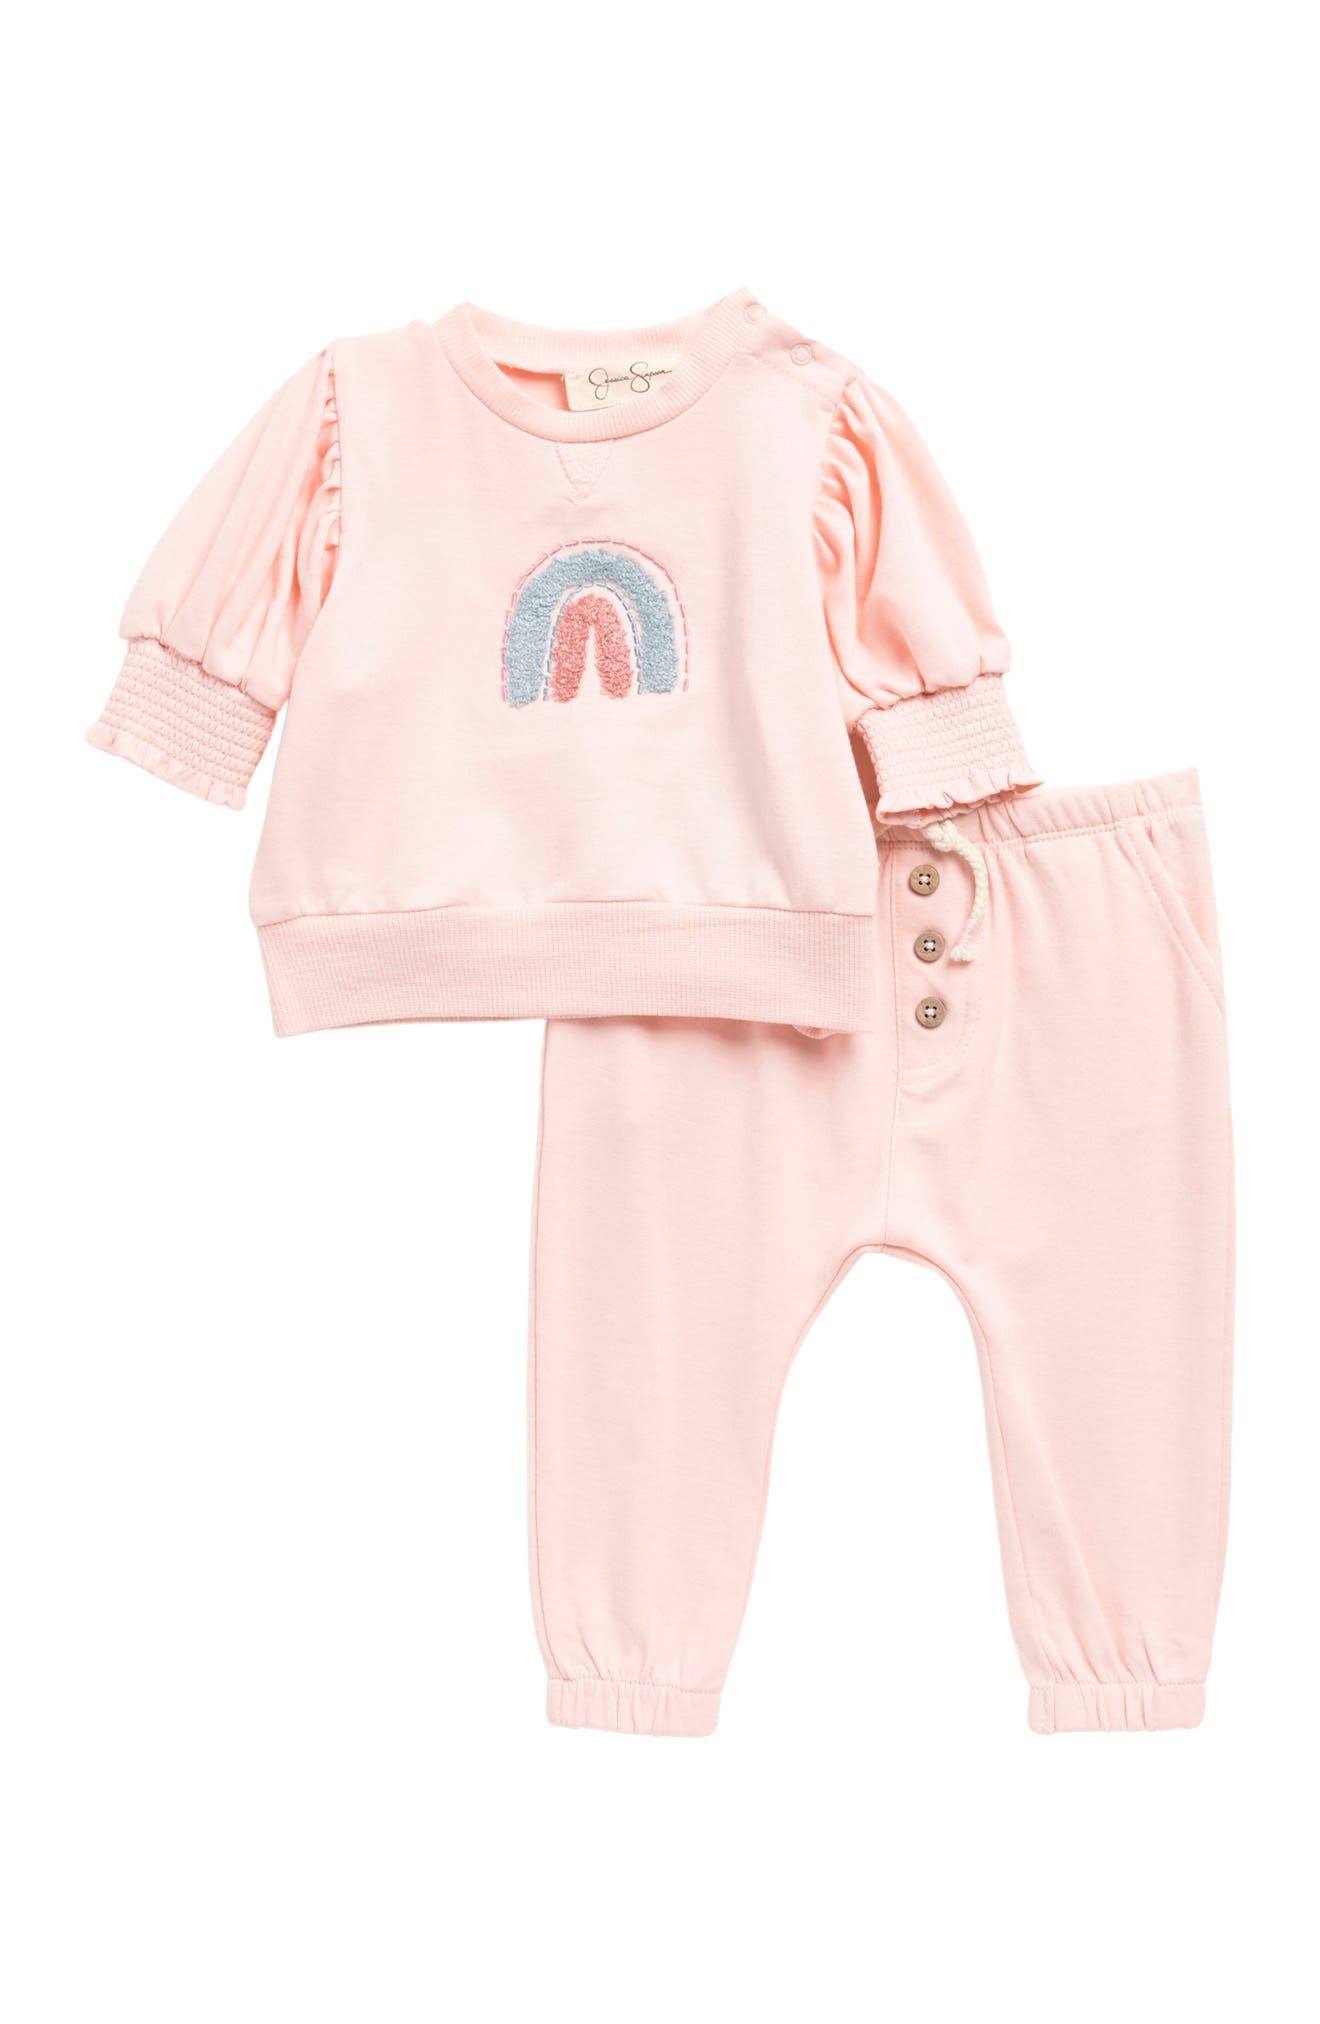 Pink baby outfits